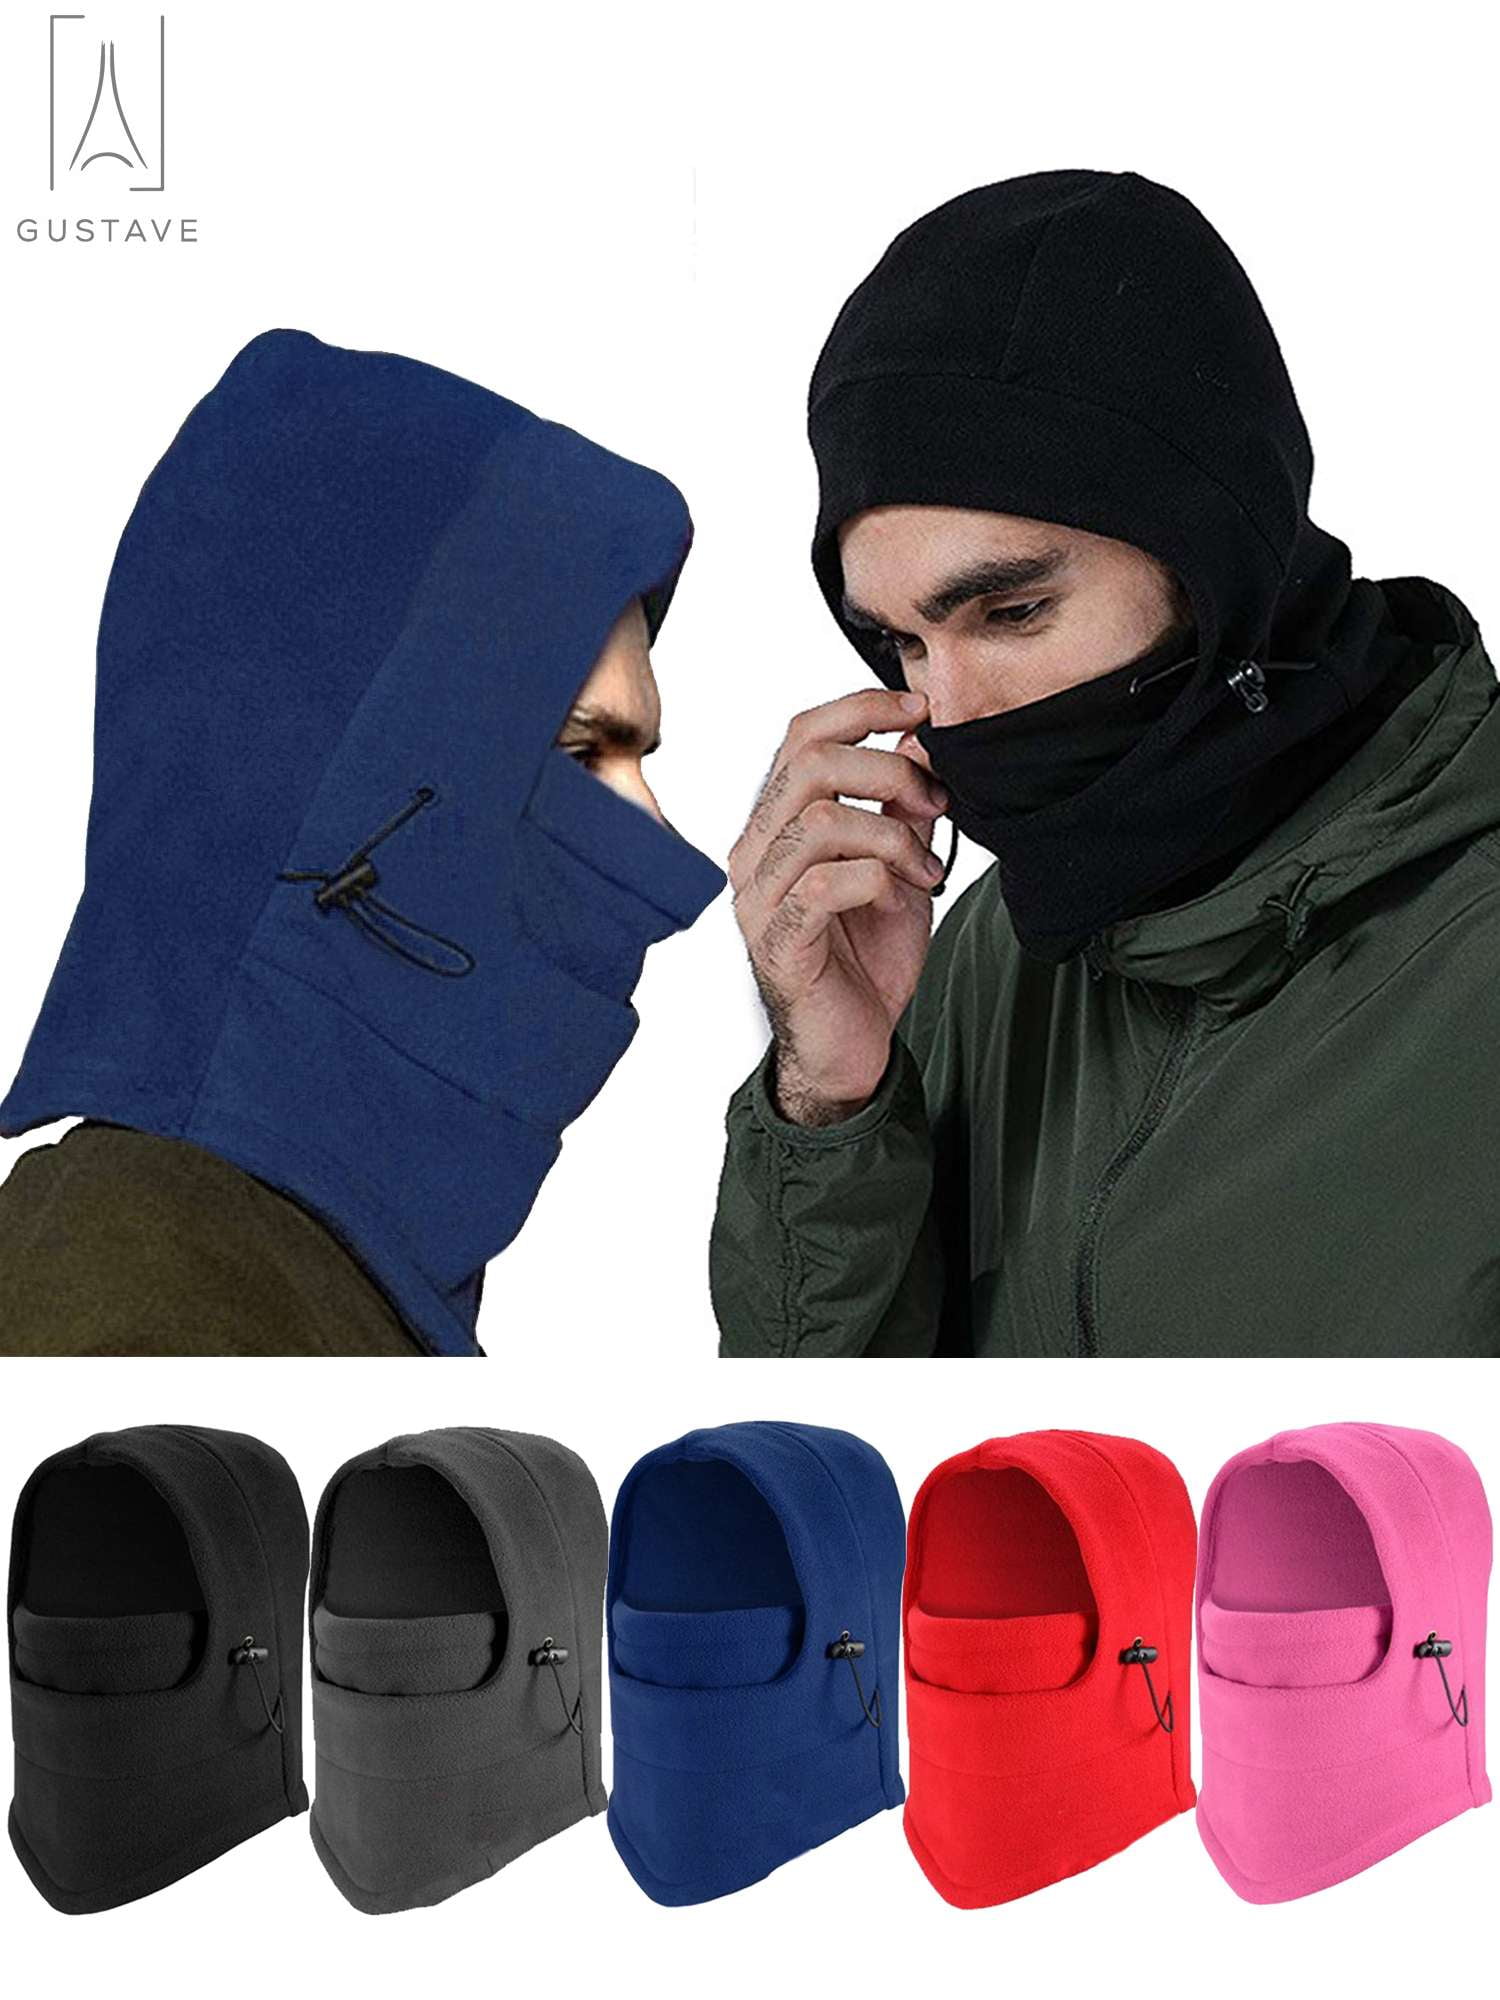 SATINIOR 14 Pieces Fleece Hat Mens Skull Cap Fleece Watch Cap Army Tactical  Winter Warm Beanie for Running Skiing Cycling Sports,14 Colors